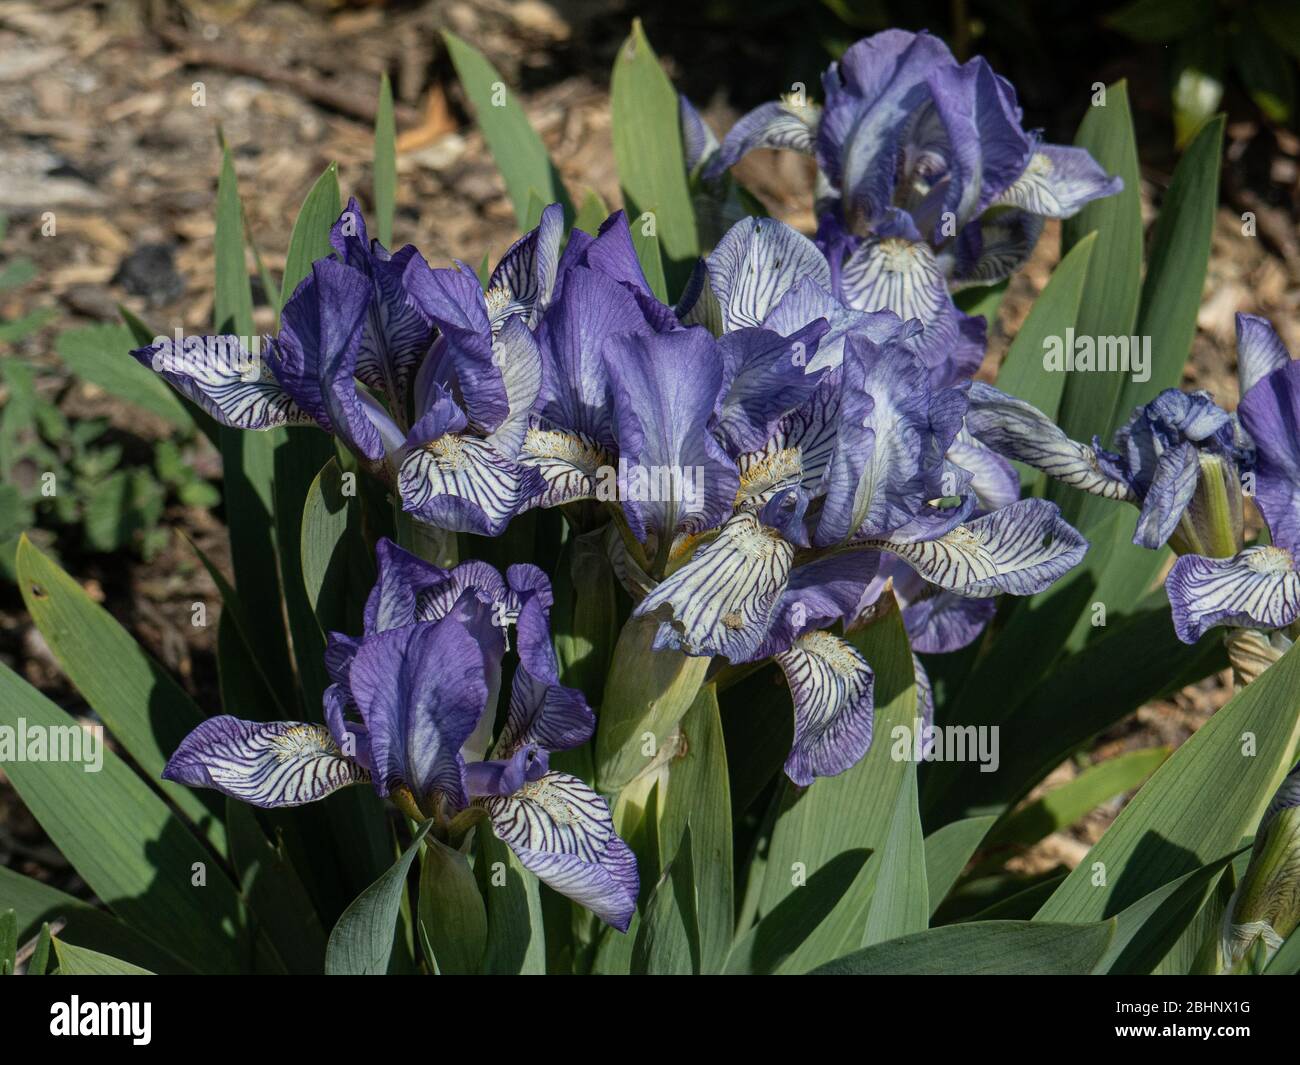 A Plant Of The Dwarf Bearded Iris Scribe Showing The Delicate Blue And White Flowers Stock Photo Alamy